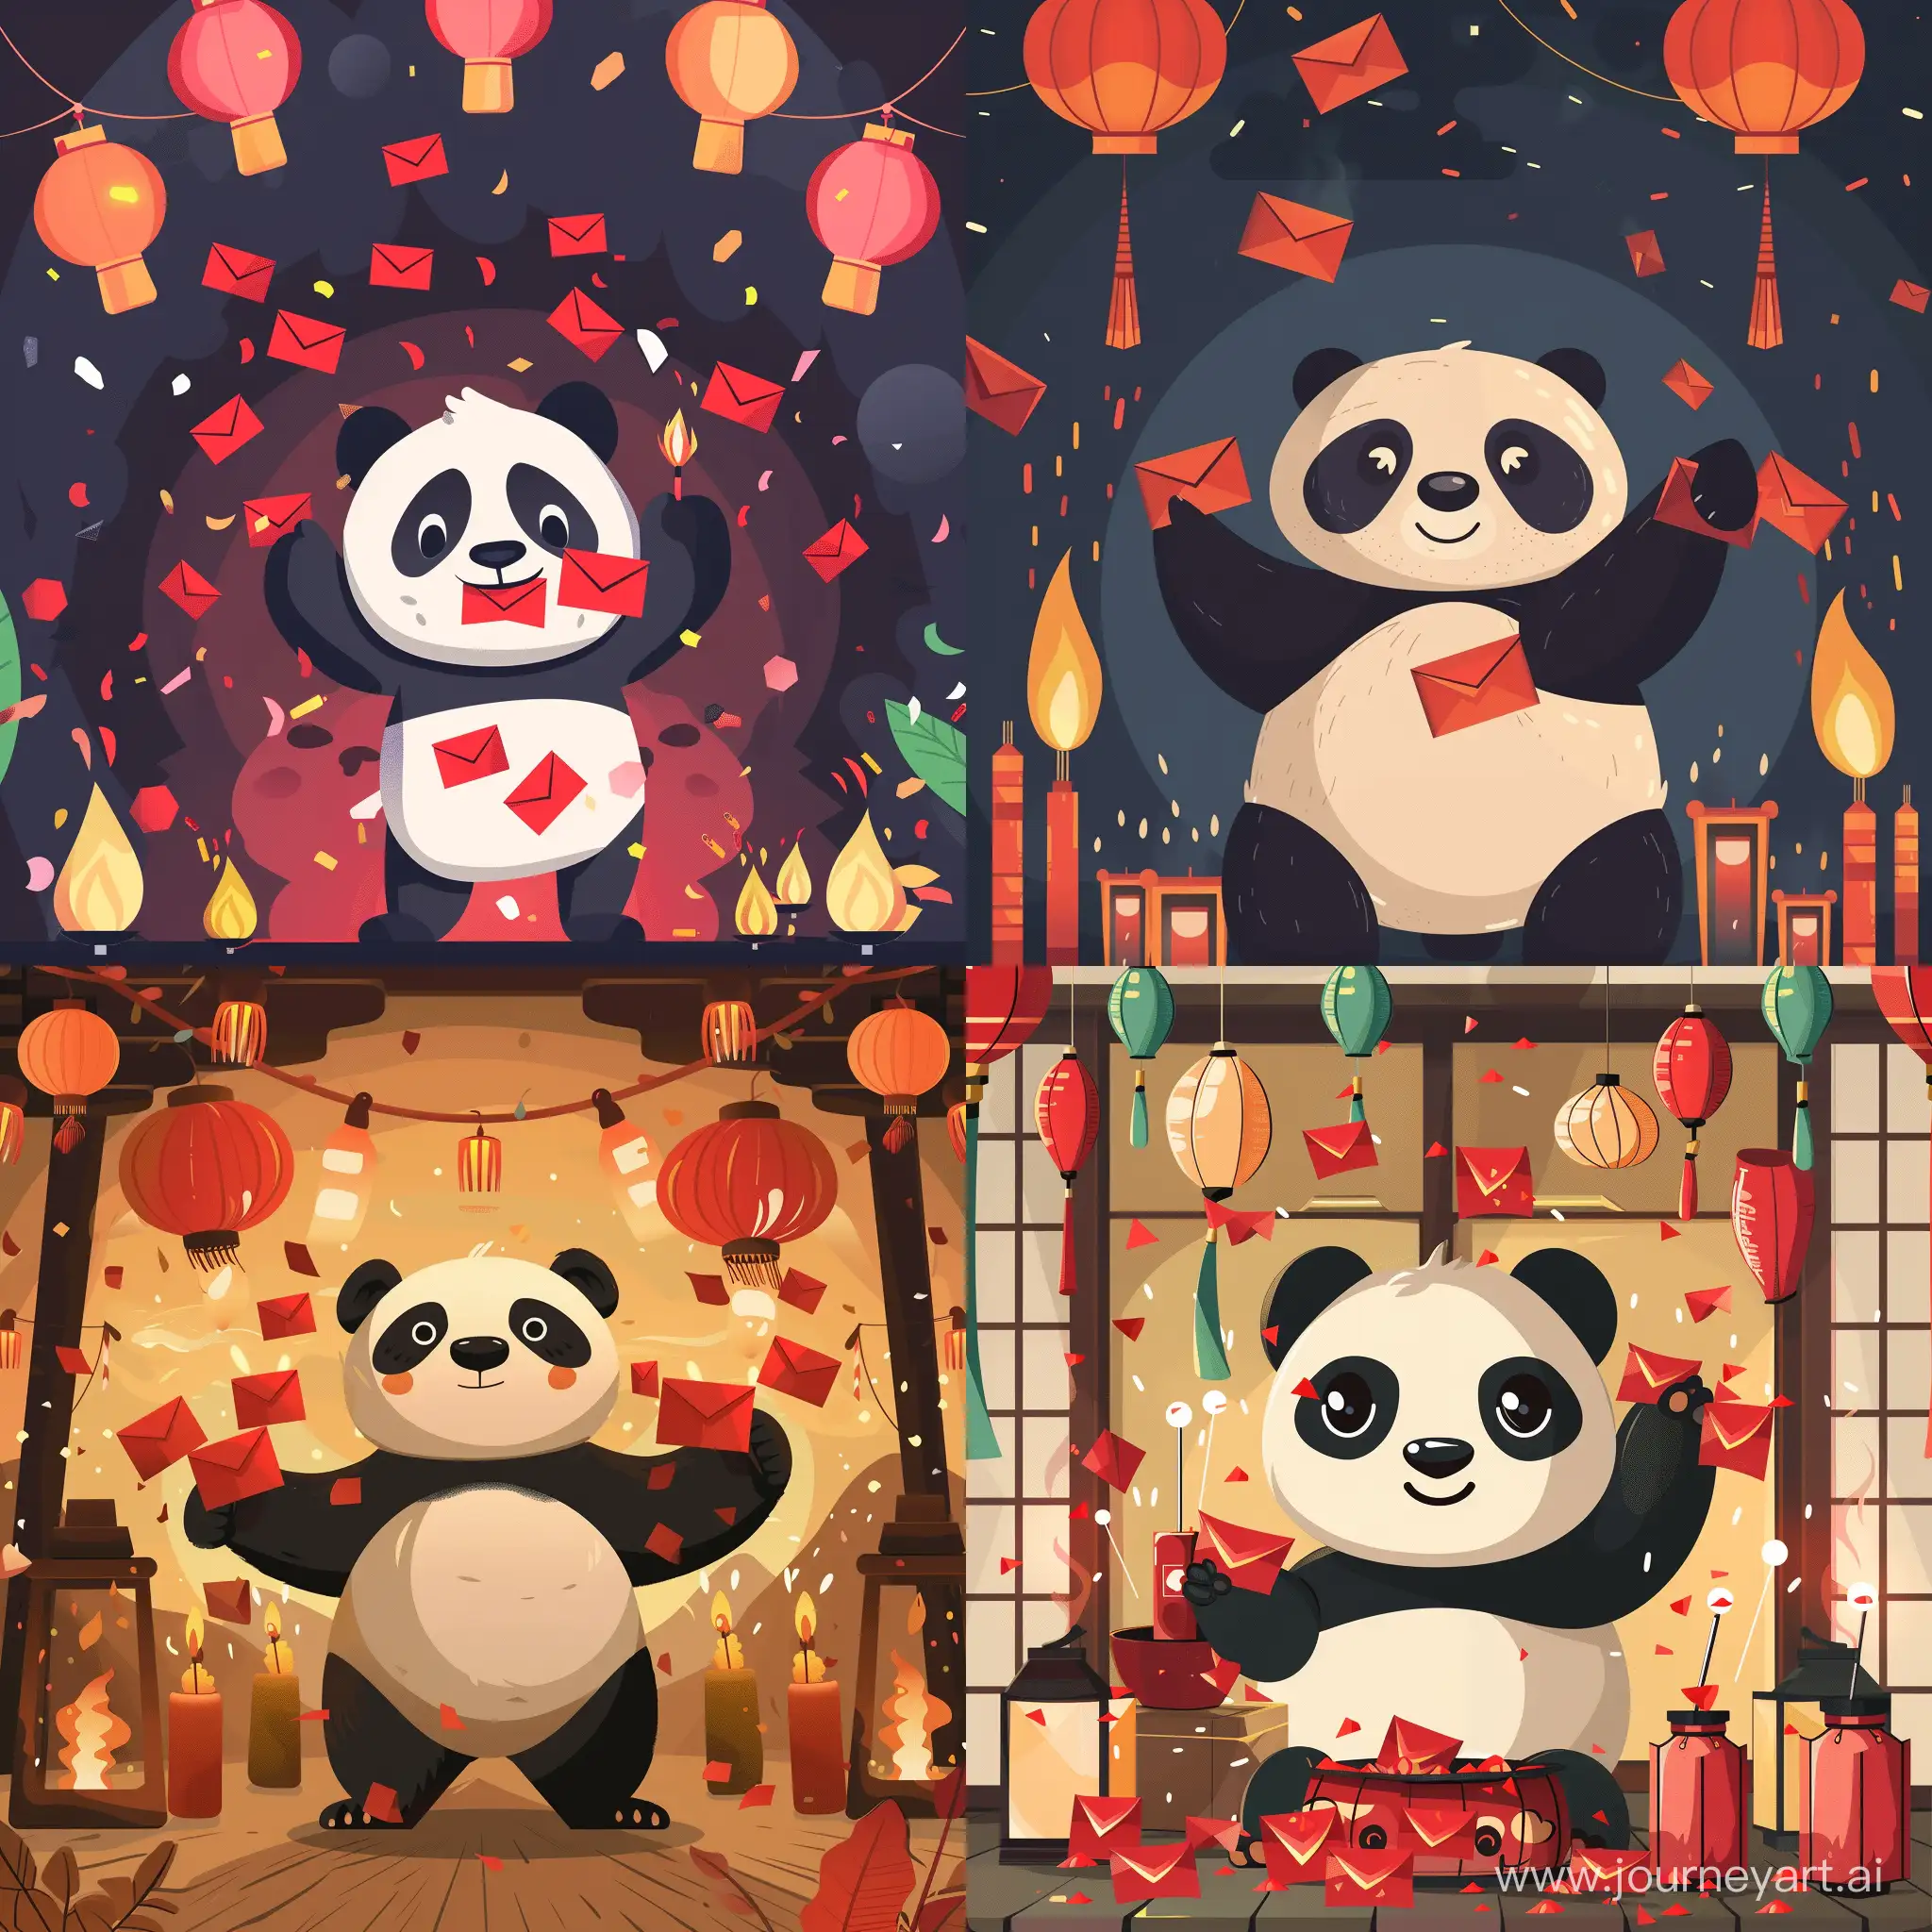 Panda-Celebrating-Chinese-New-Year-Red-Envelope-Scattering-Amid-Firecrackers-and-Lanterns